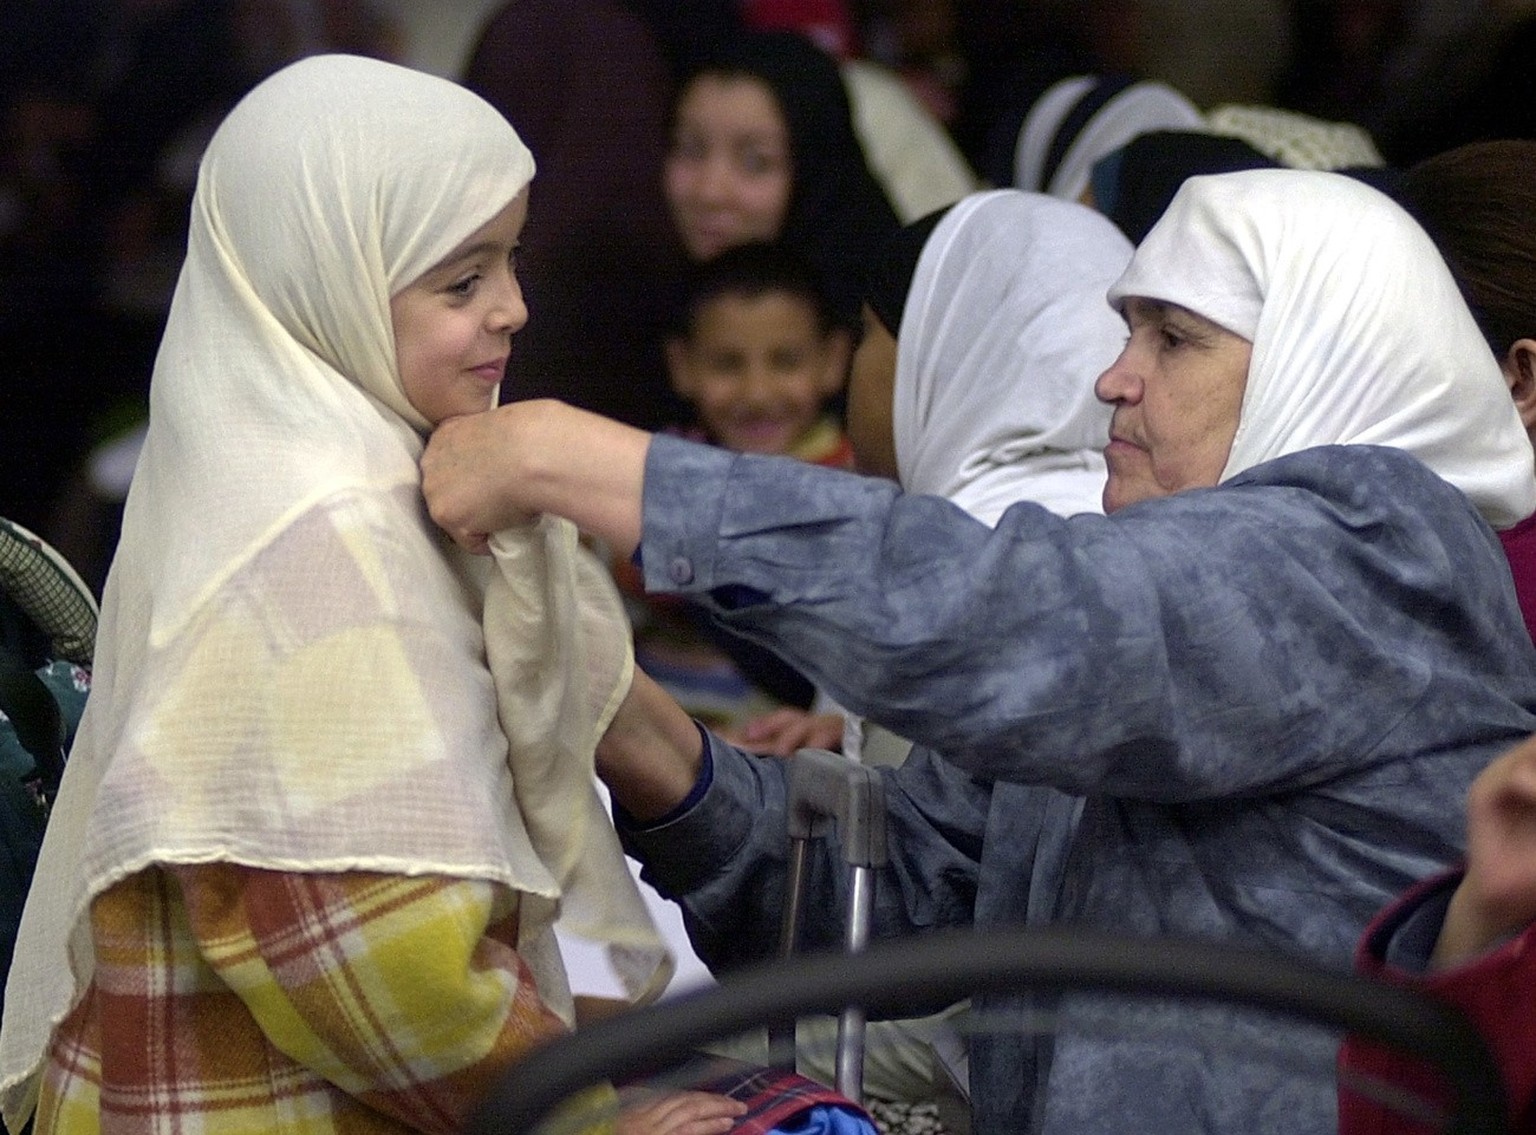 A muslim woman, left, adjusts the veil of a young girl during the 19th conference of the Union of islamic organisations of France (UOIF) at Le Bourget airport exhibition hall, north of Paris, Sunday M ...